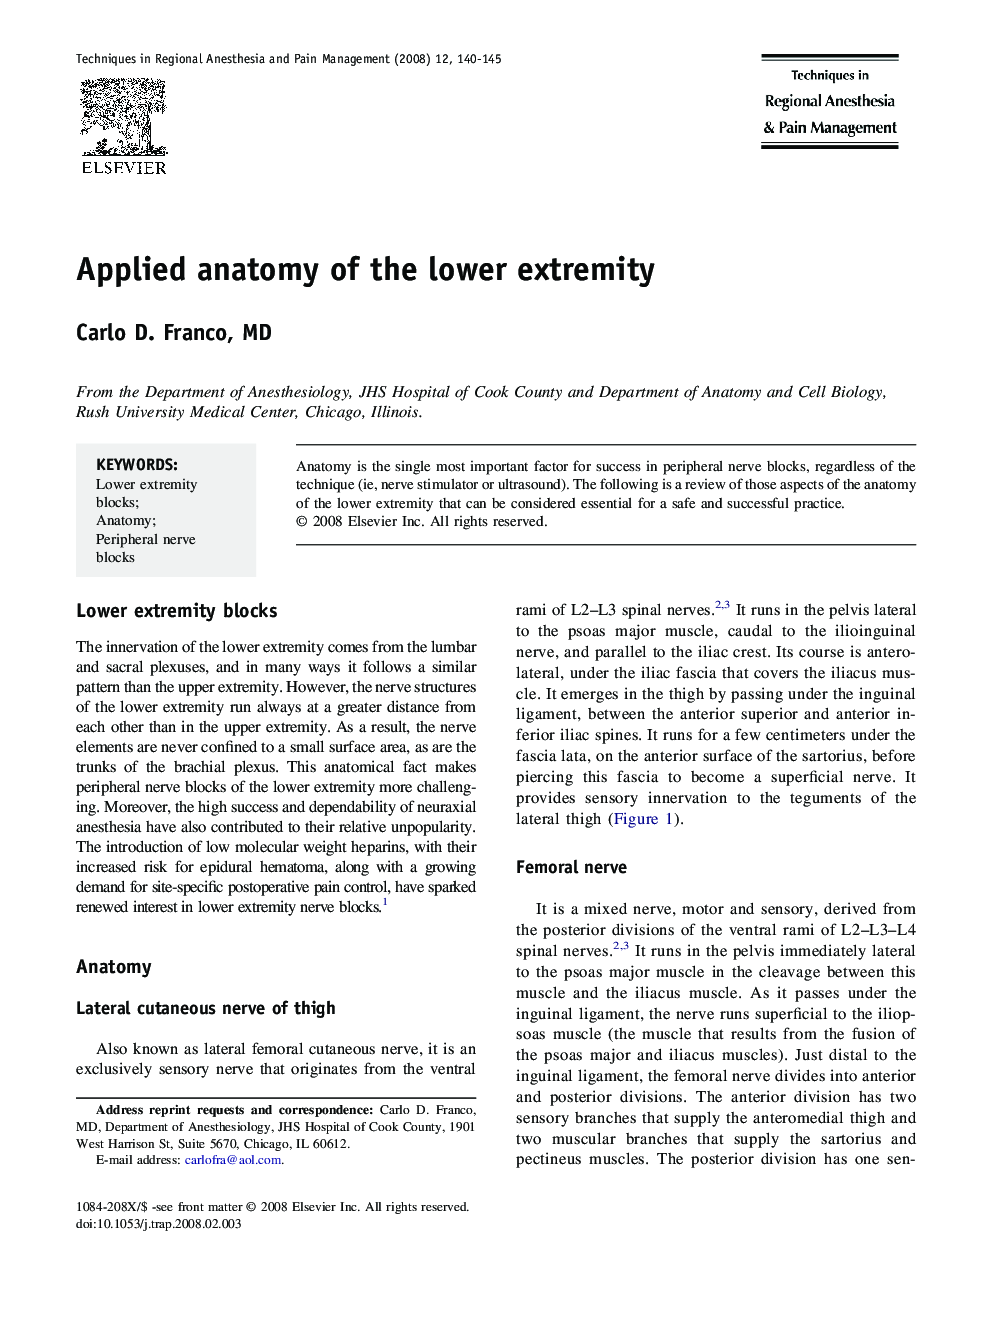 Applied anatomy of the lower extremity